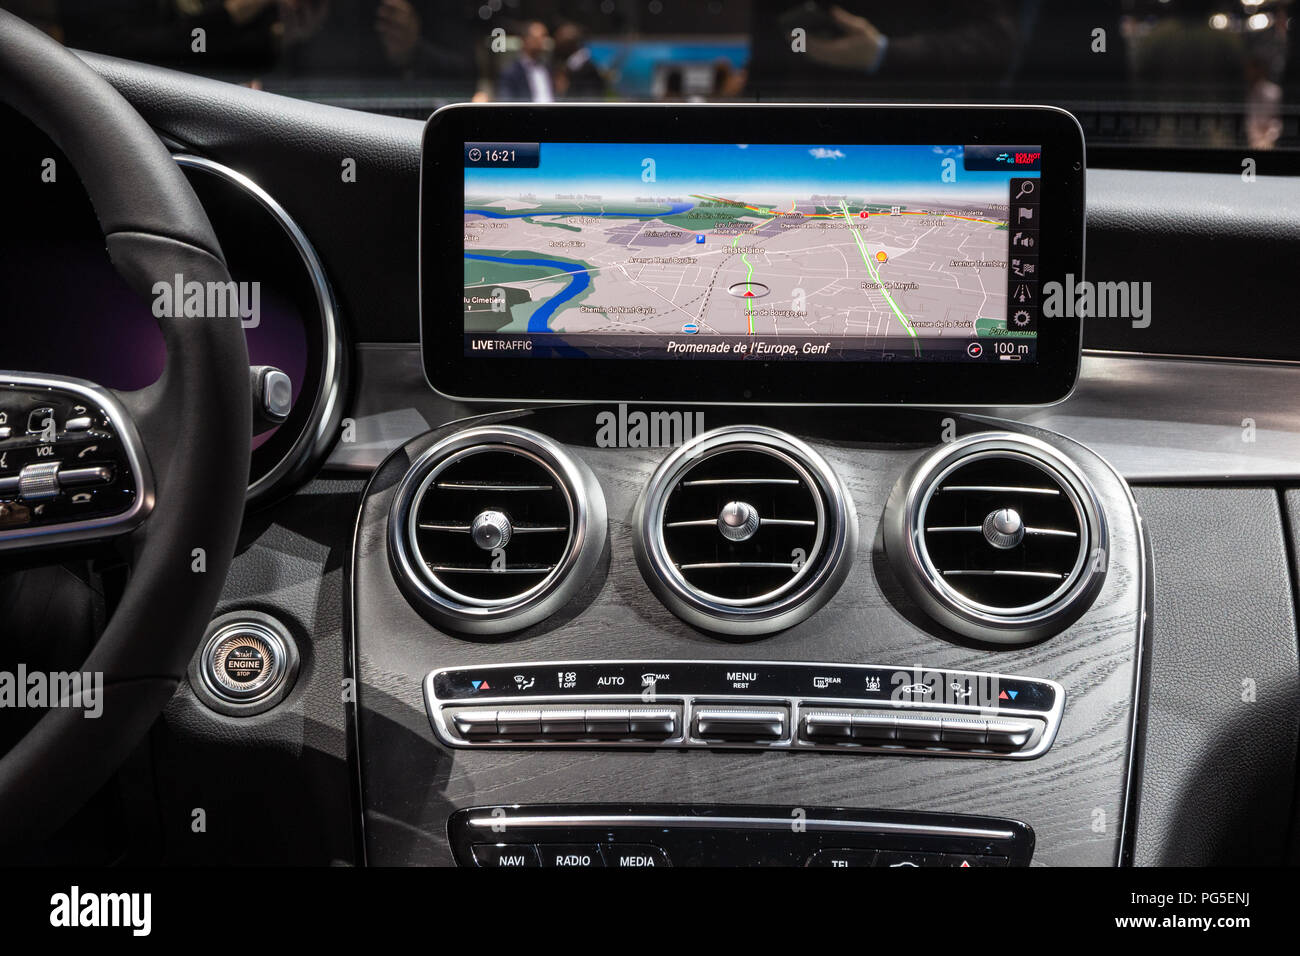 GENEVA, SWITZERLAND - MARCH 6, 2018: Dashboard console view of a Mercedes AMG C43 car showcased at the 88th Geneva International Motor Show. Stock Photo